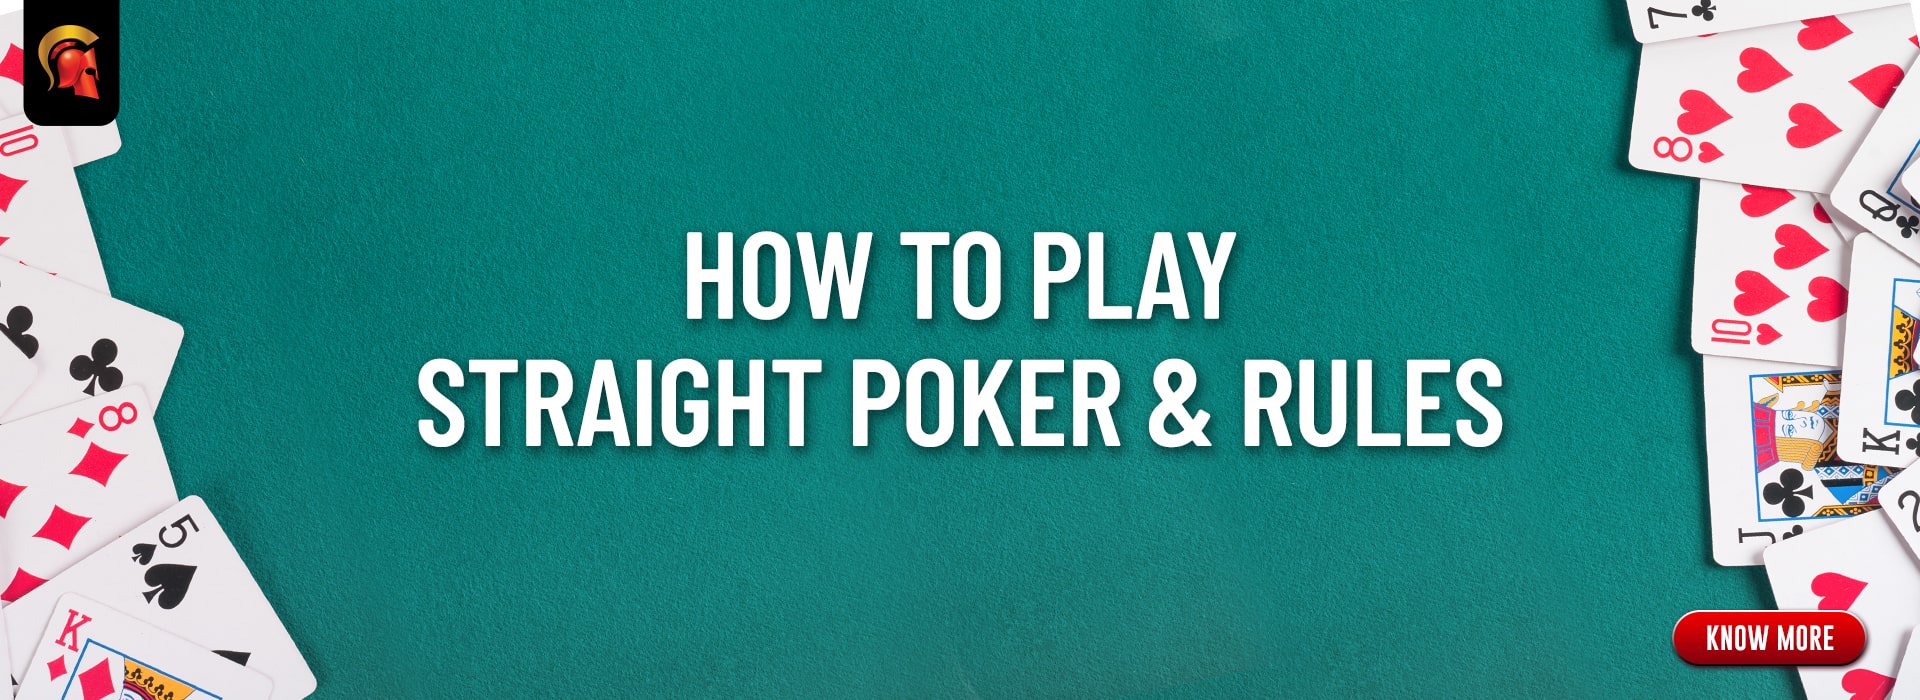 How to play Straight poker 